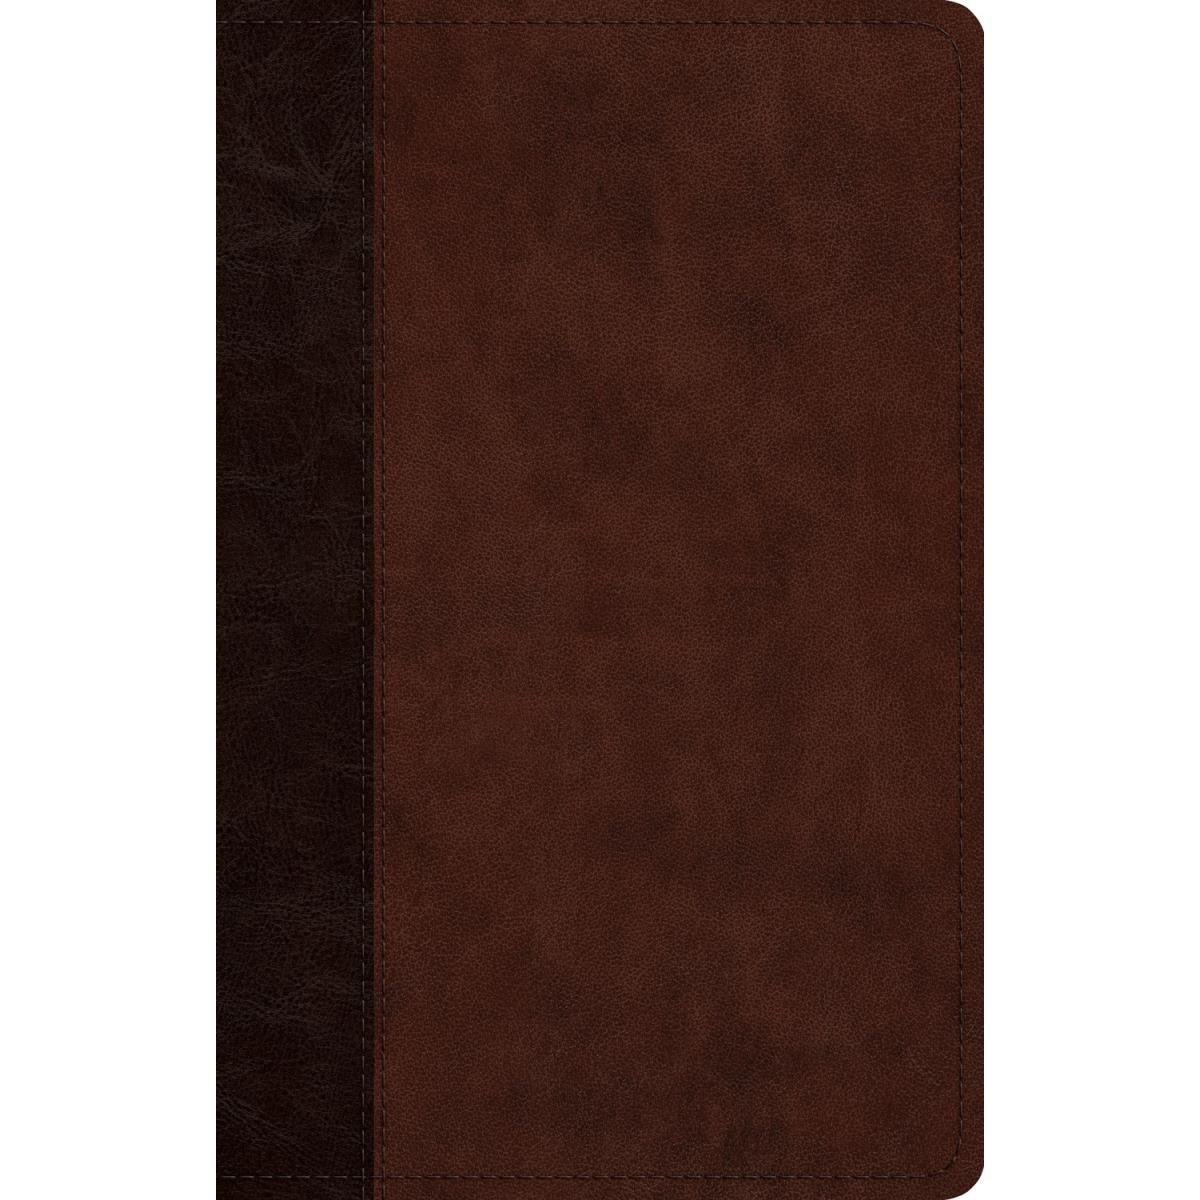 ISBN 9781433581670 product image for 259925 ESV Large Print Thinline Reference Timeless Design Bible - Brown & Walnut | upcitemdb.com